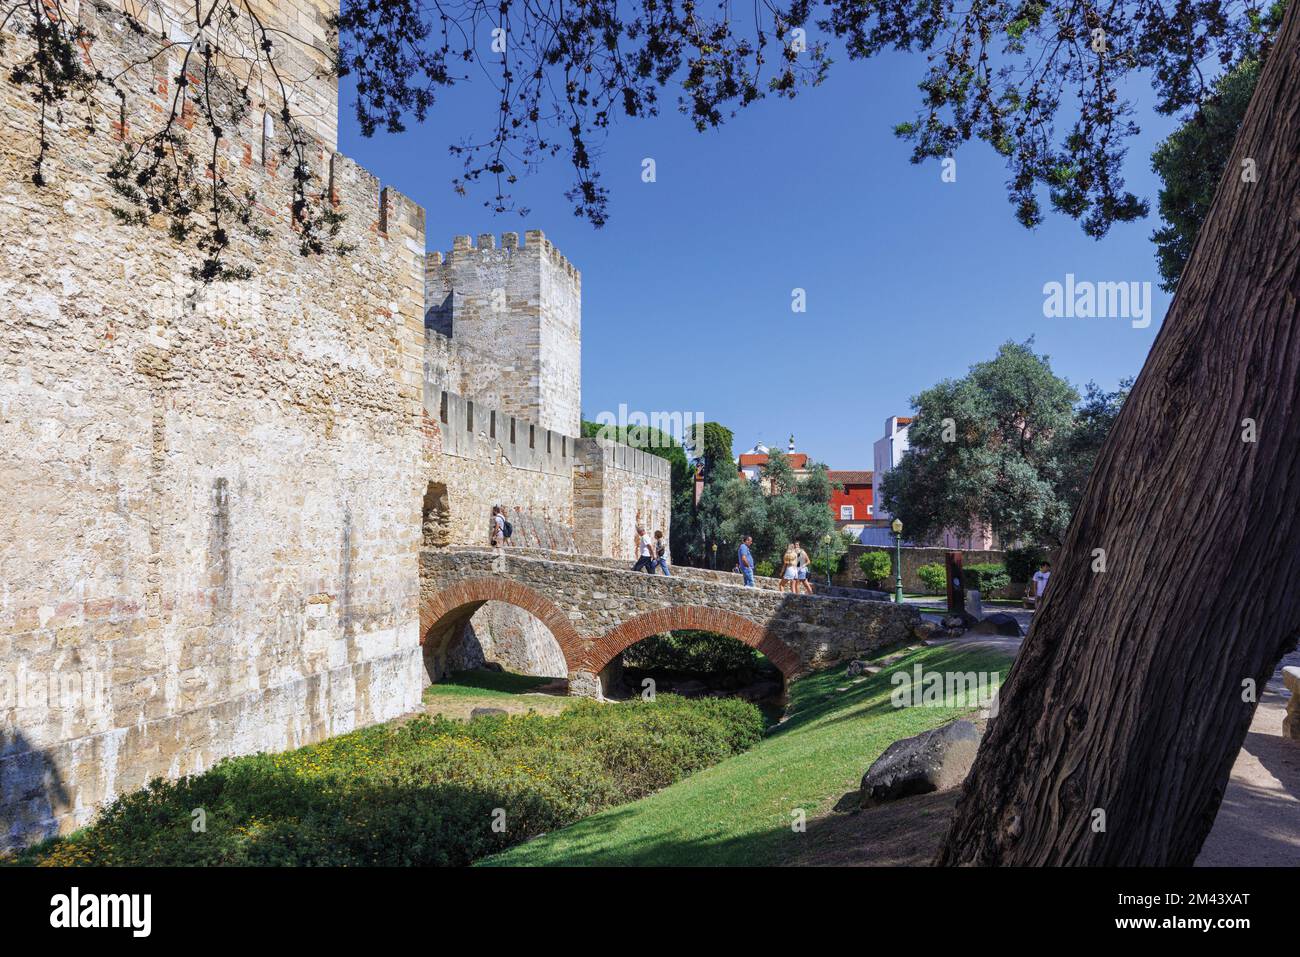 Lisbon, Portugal.  Entrance to the Castelo de Sao Jorge/the Castle of Saint George over the now dry moat. Stock Photo